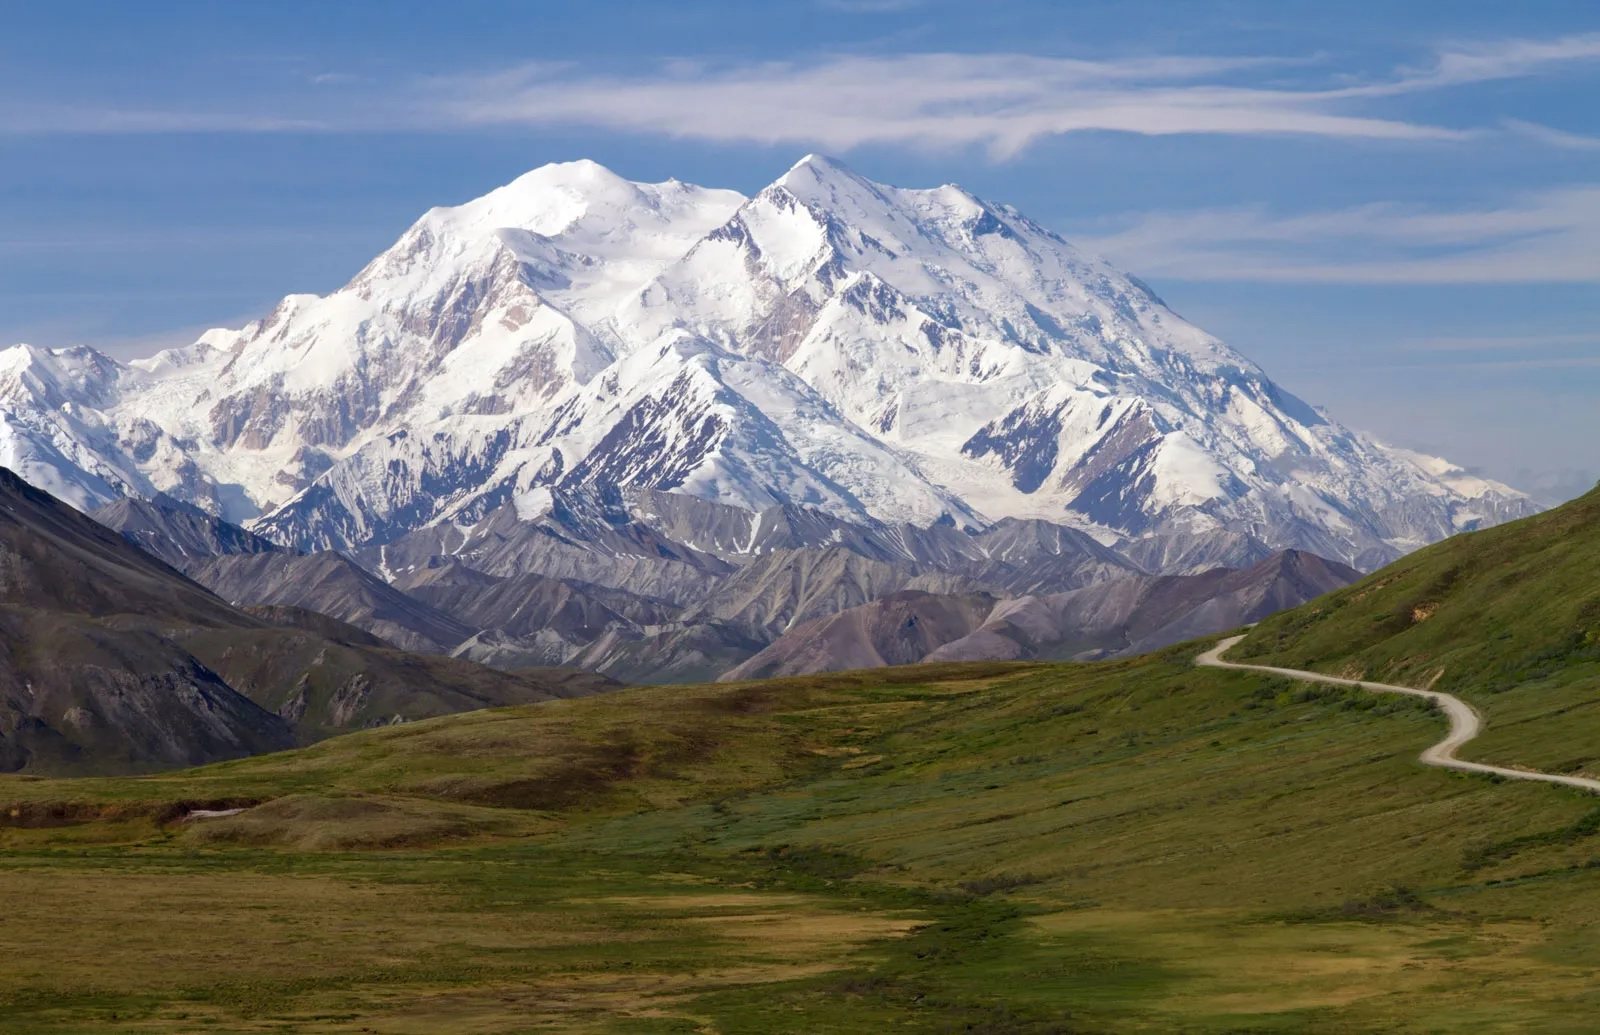 10 Reasons Why Denali National Park Should Be on Your Bucket List